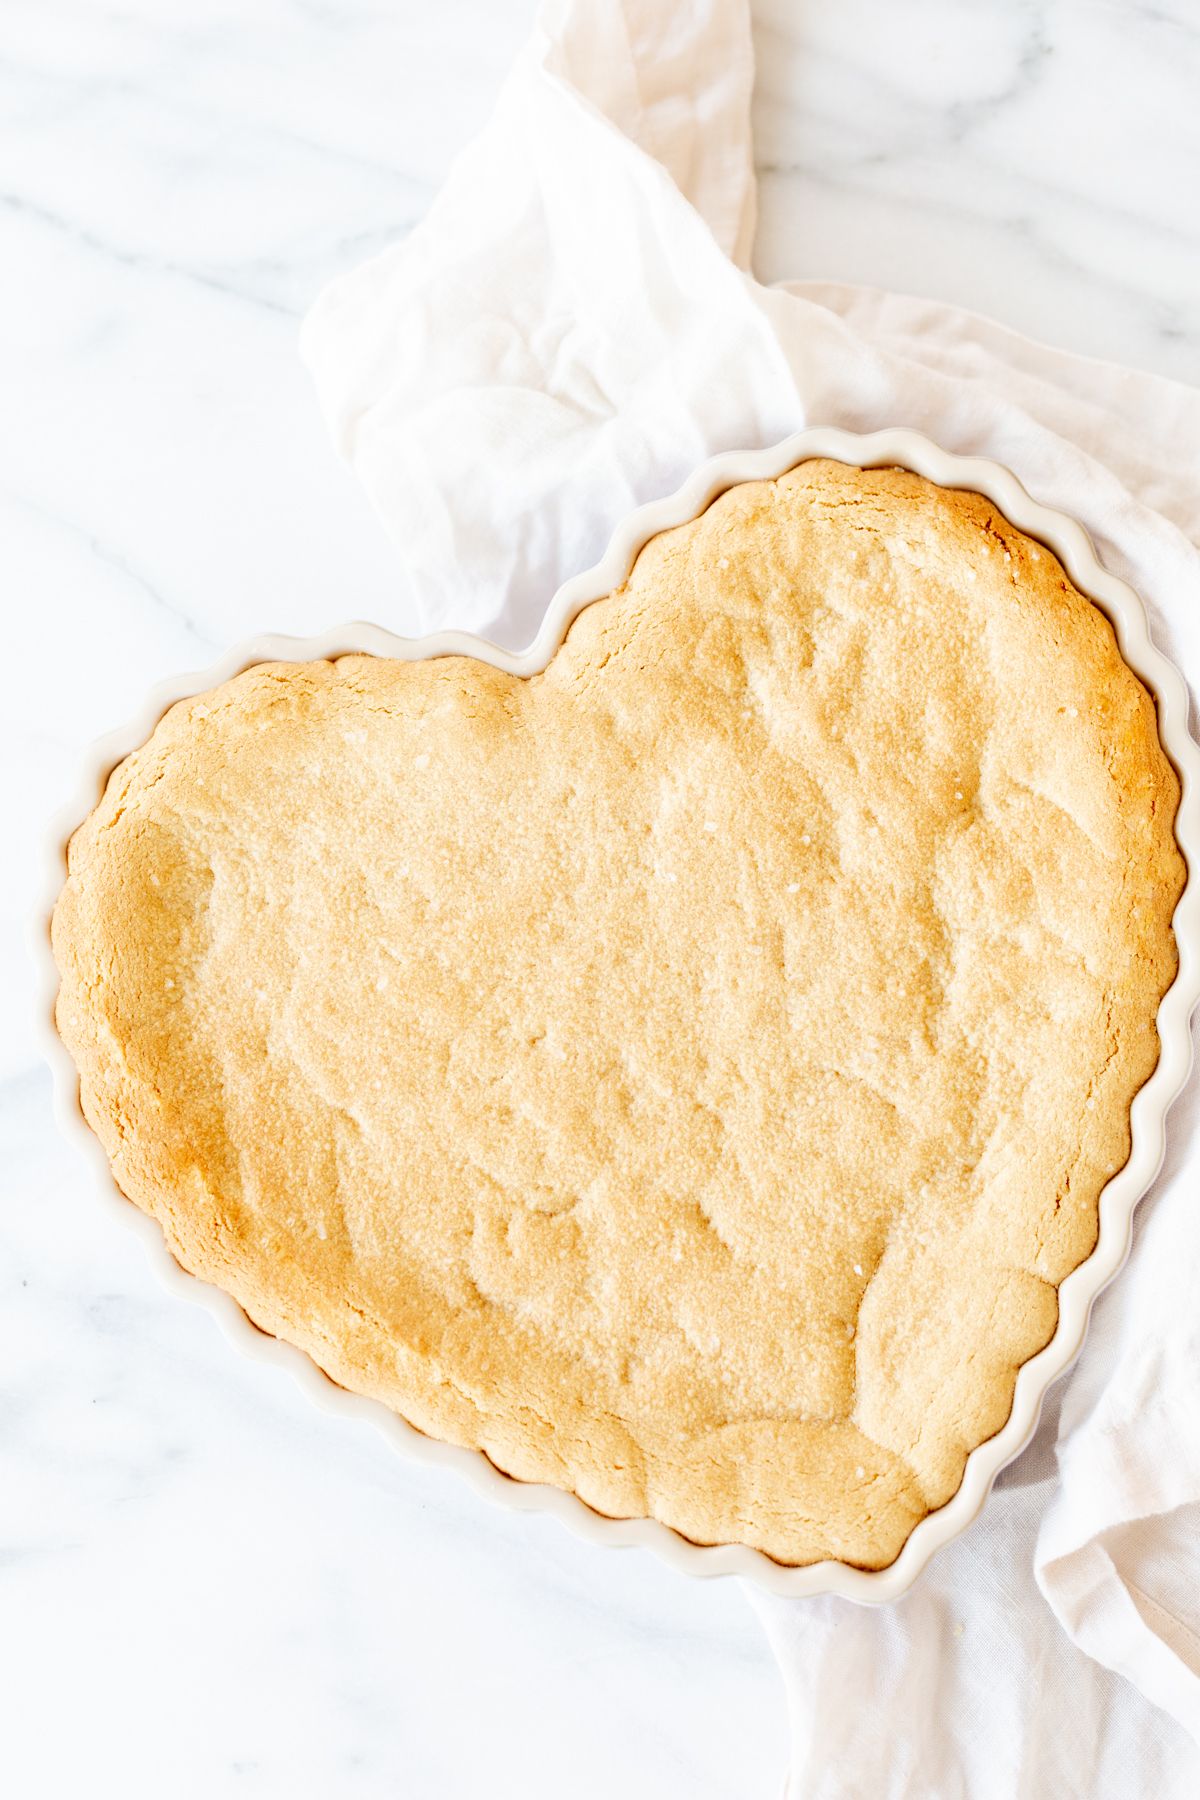 A heart shaped peanut butter cookie cake on a marble countertop.